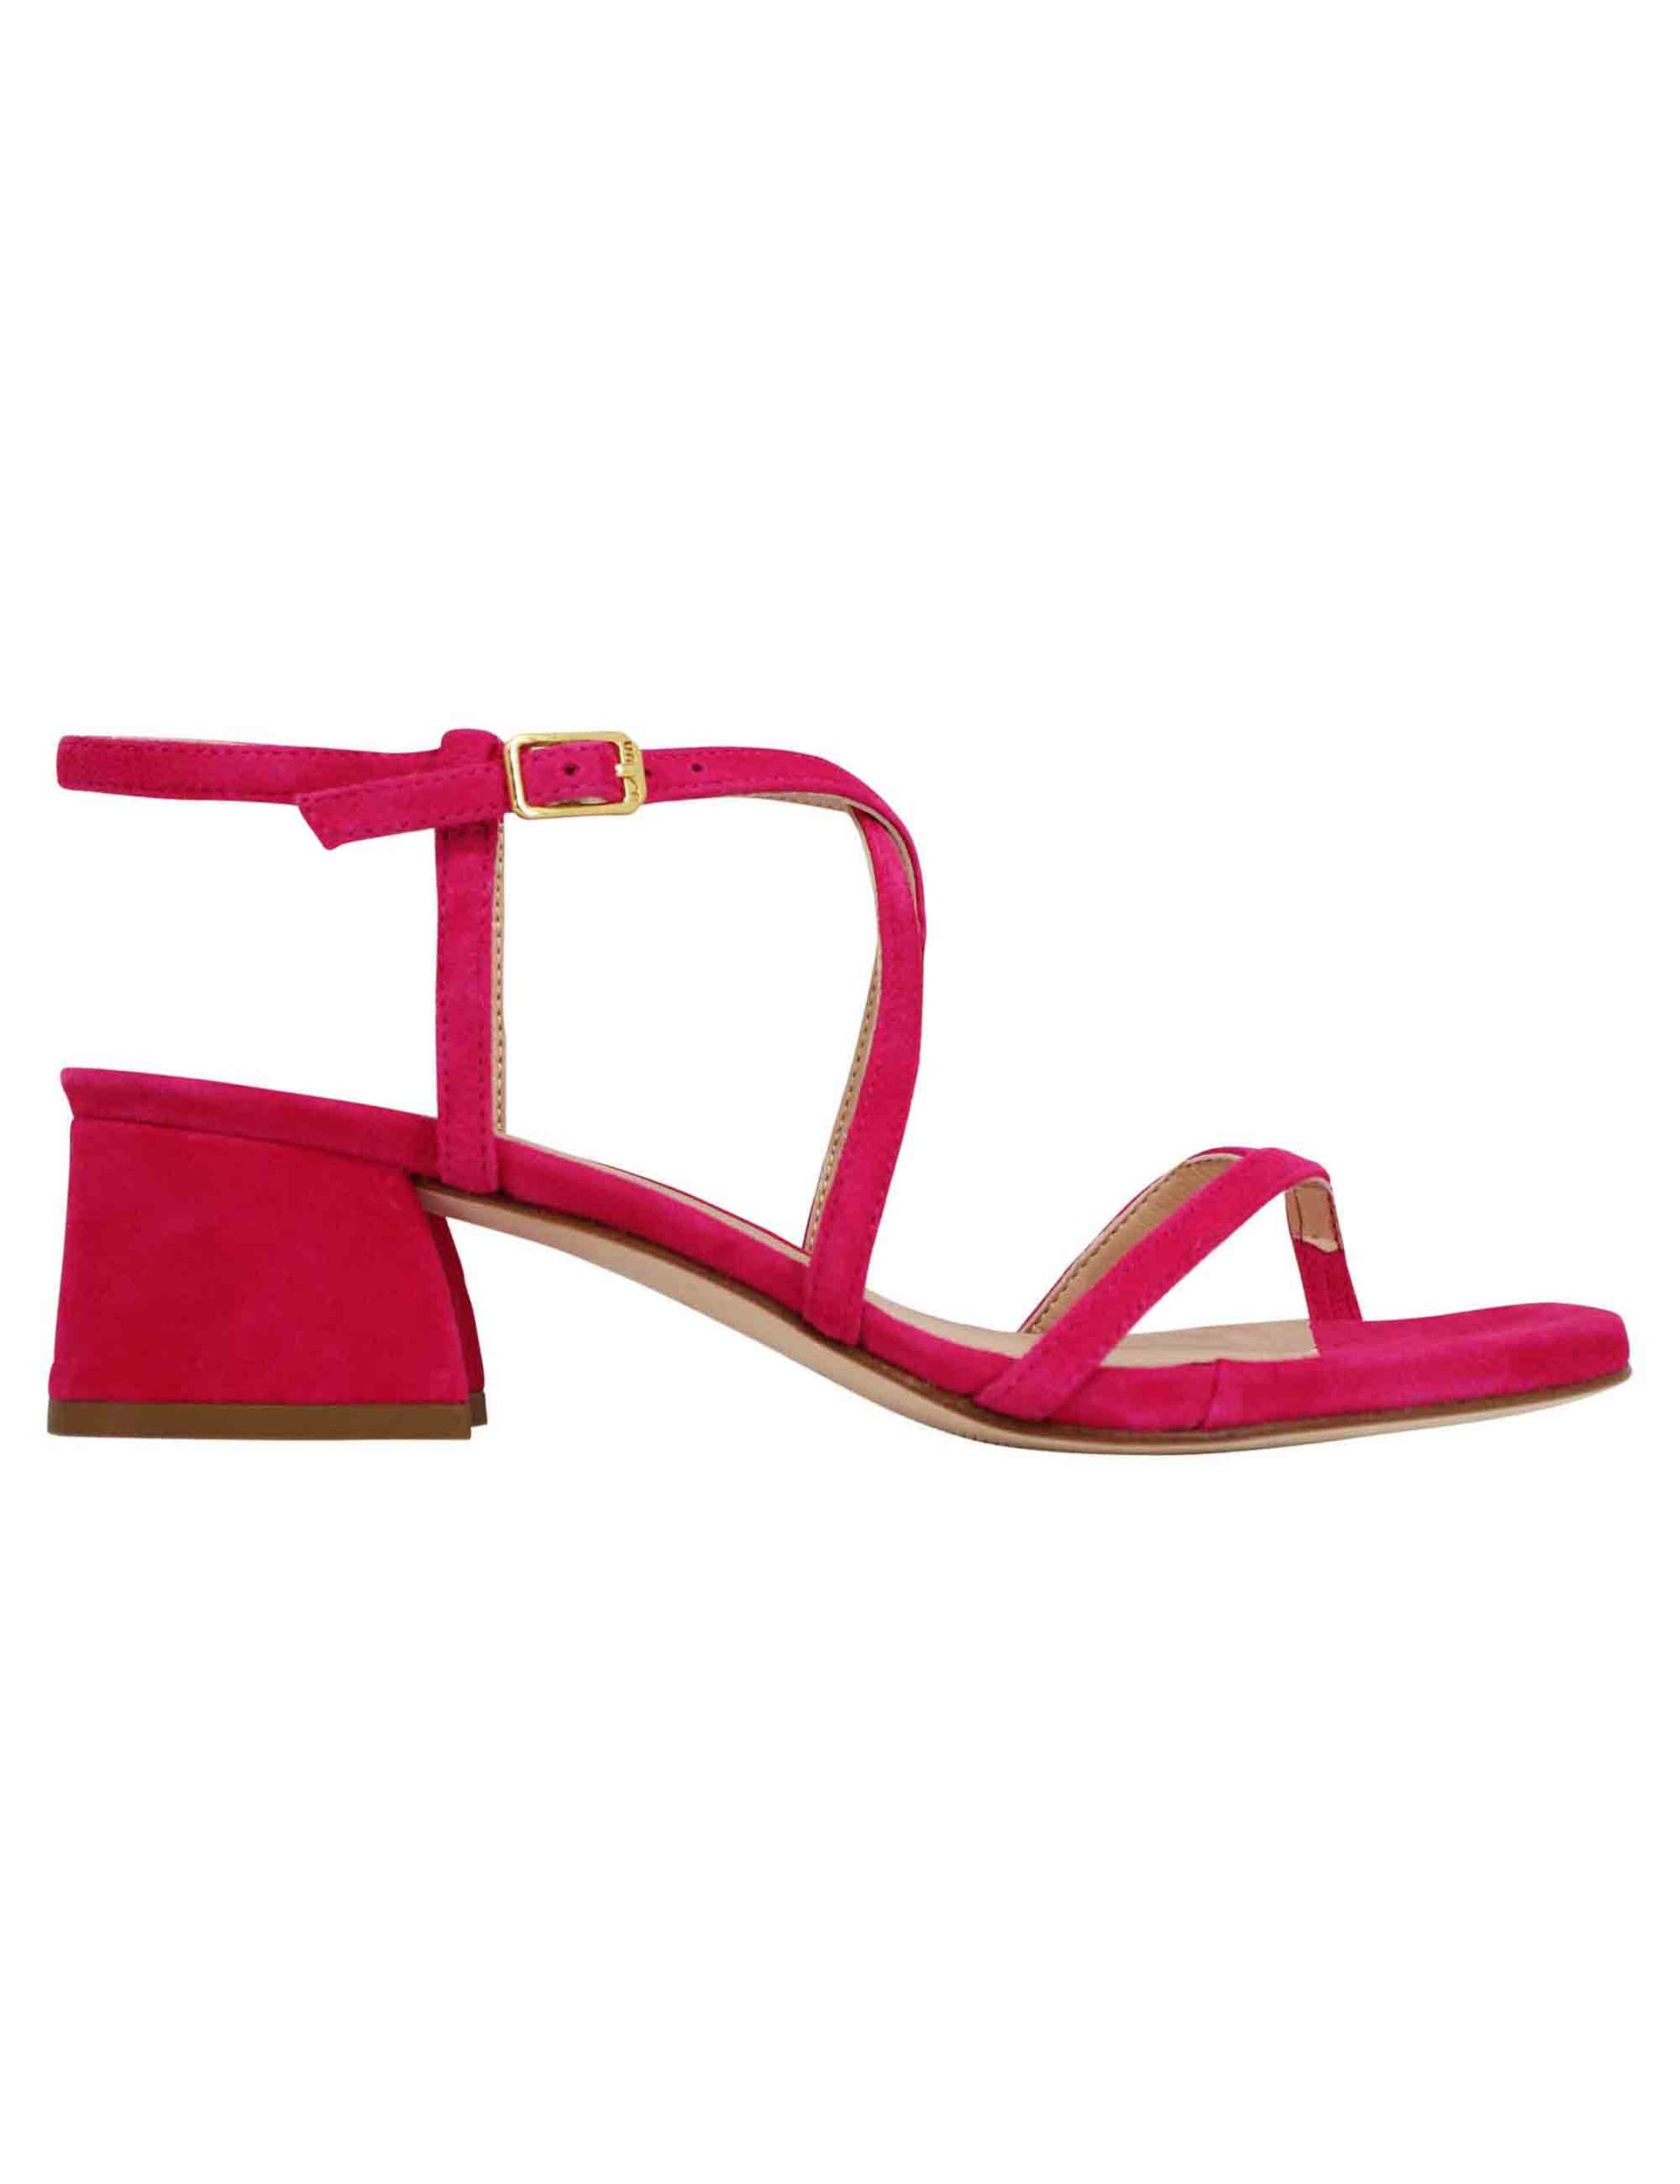 Women's flip-flop sandals in fuchsia suede with ankle strap